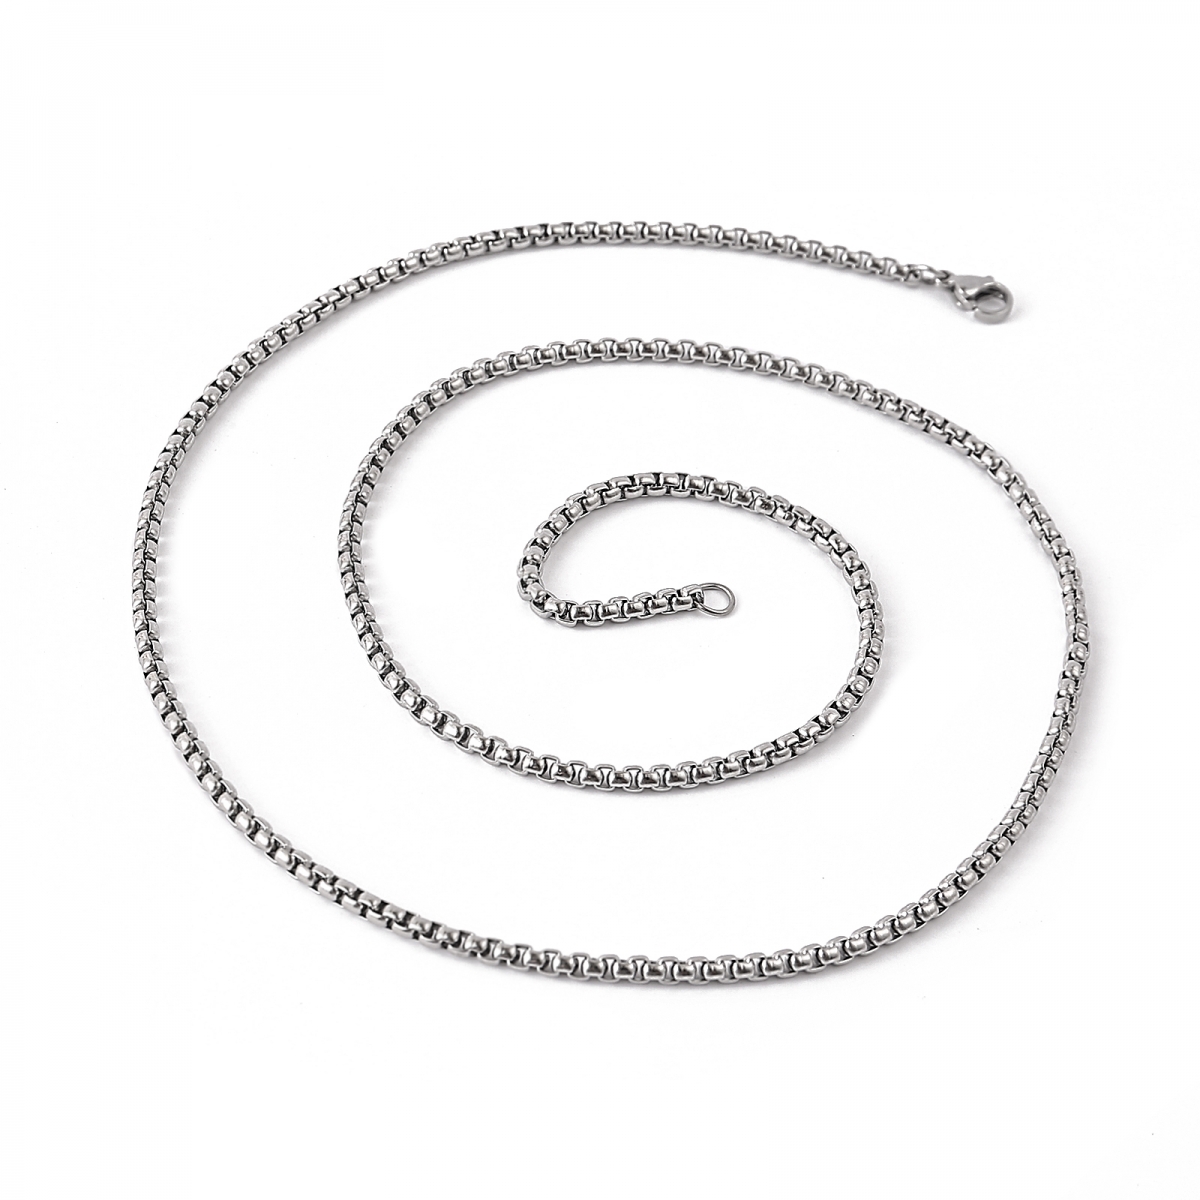 3mm 60cm Box Chain Silver US$0.7/PC-NORSECOLLECTION- Viking Jewelry,Viking Necklace,Viking Bracelet,Viking Rings,Viking Mugs,Viking Accessories,Viking Crafts